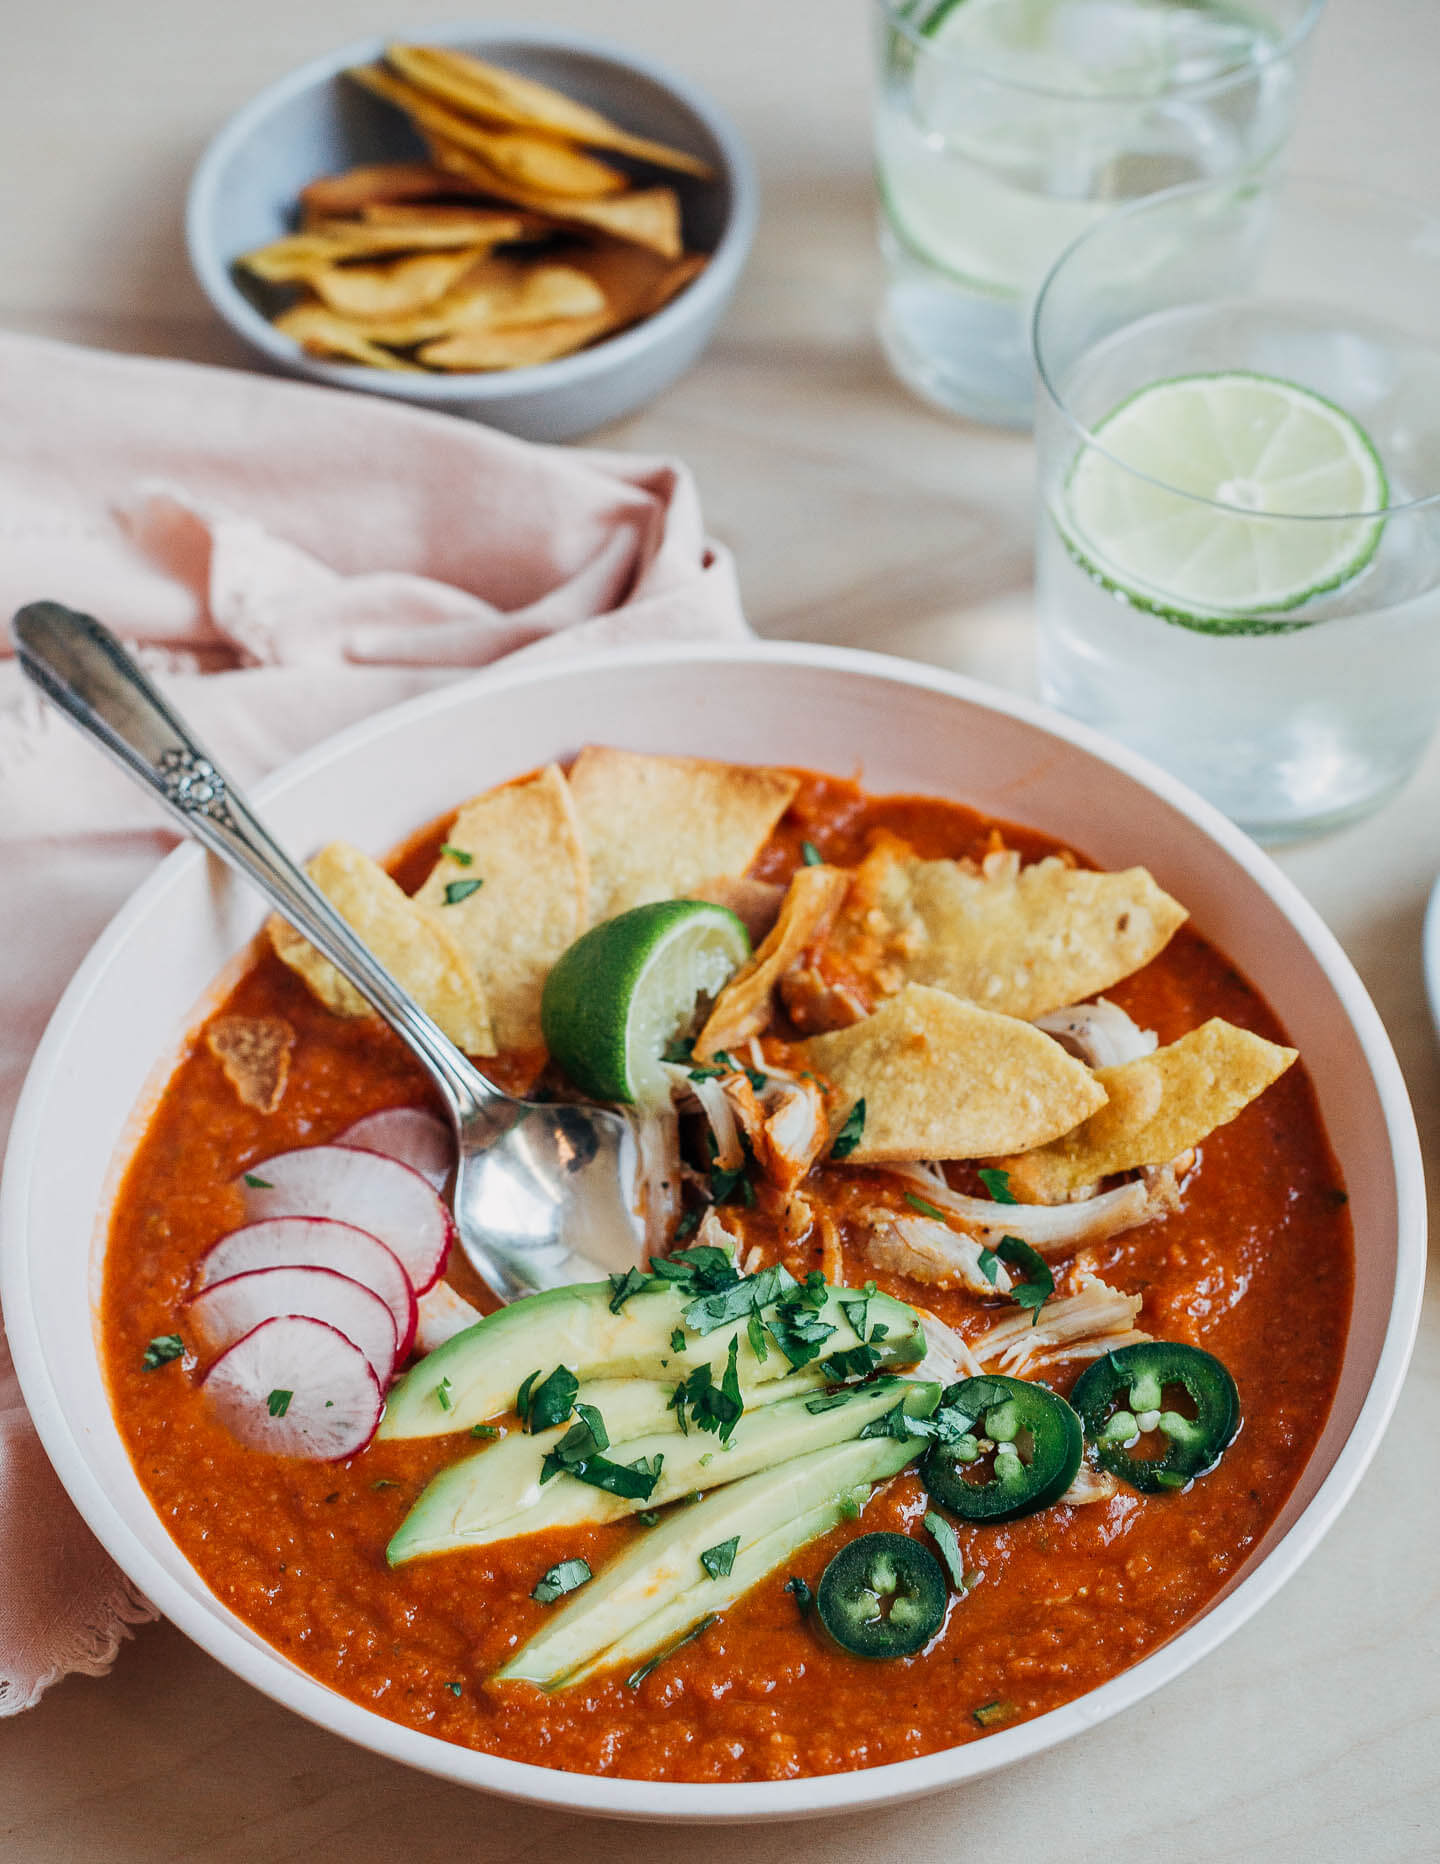 A bowl of tortilla soup topped with avocado, radishes, jalapeños, fried tortillas and chicken.